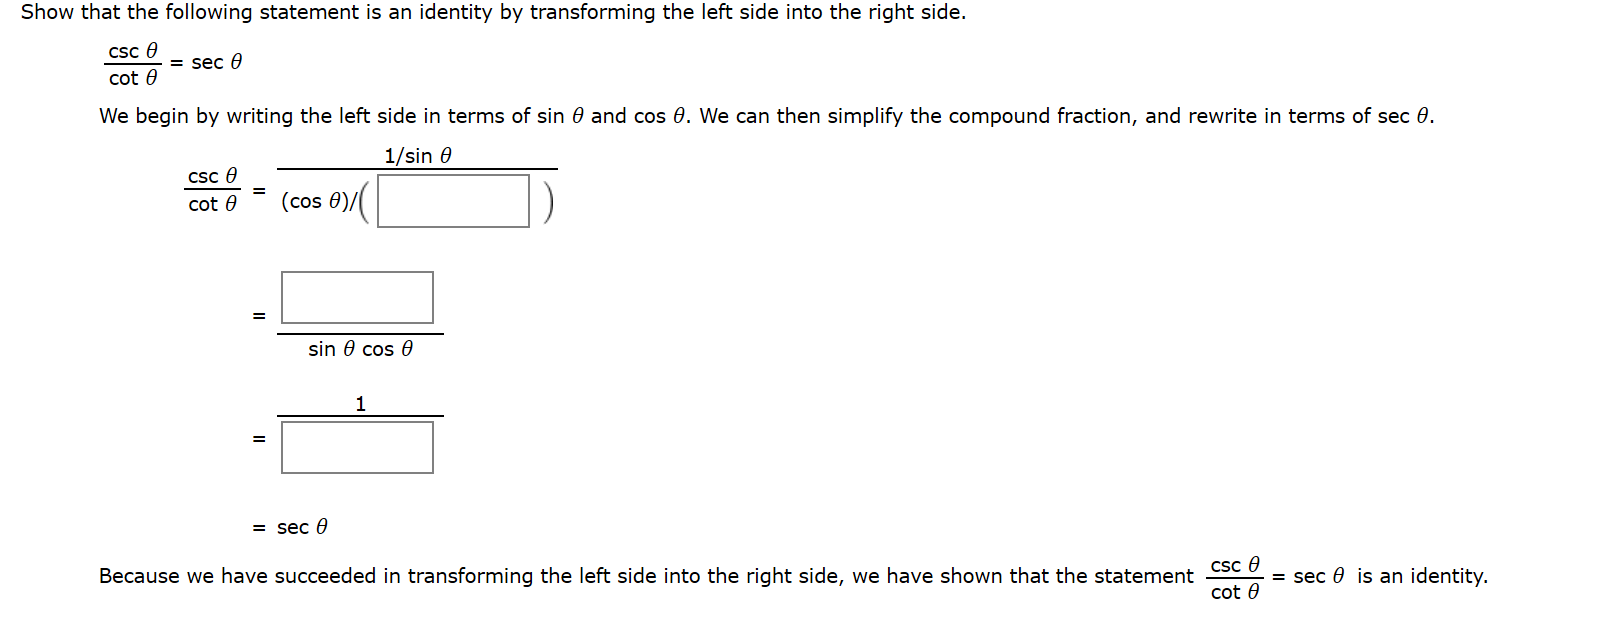 Show that the following statement is an identity by transforming the left side into the right side.
Csc e
= sec 0
cot 0
We begin by writing the left side in terms of sin 0 and cos 0. We can then simplify the compound fraction, and rewrite in terms of sec 0.
1/sin 0
Csc 0
cot 0
(cos 0)/
sin 0 cos 0
1
= sec 0
Csc e
cot 0
Because we have succeeded in transforming the left side into the right side, we have shown that the statement
= sec 0 is an identity.
